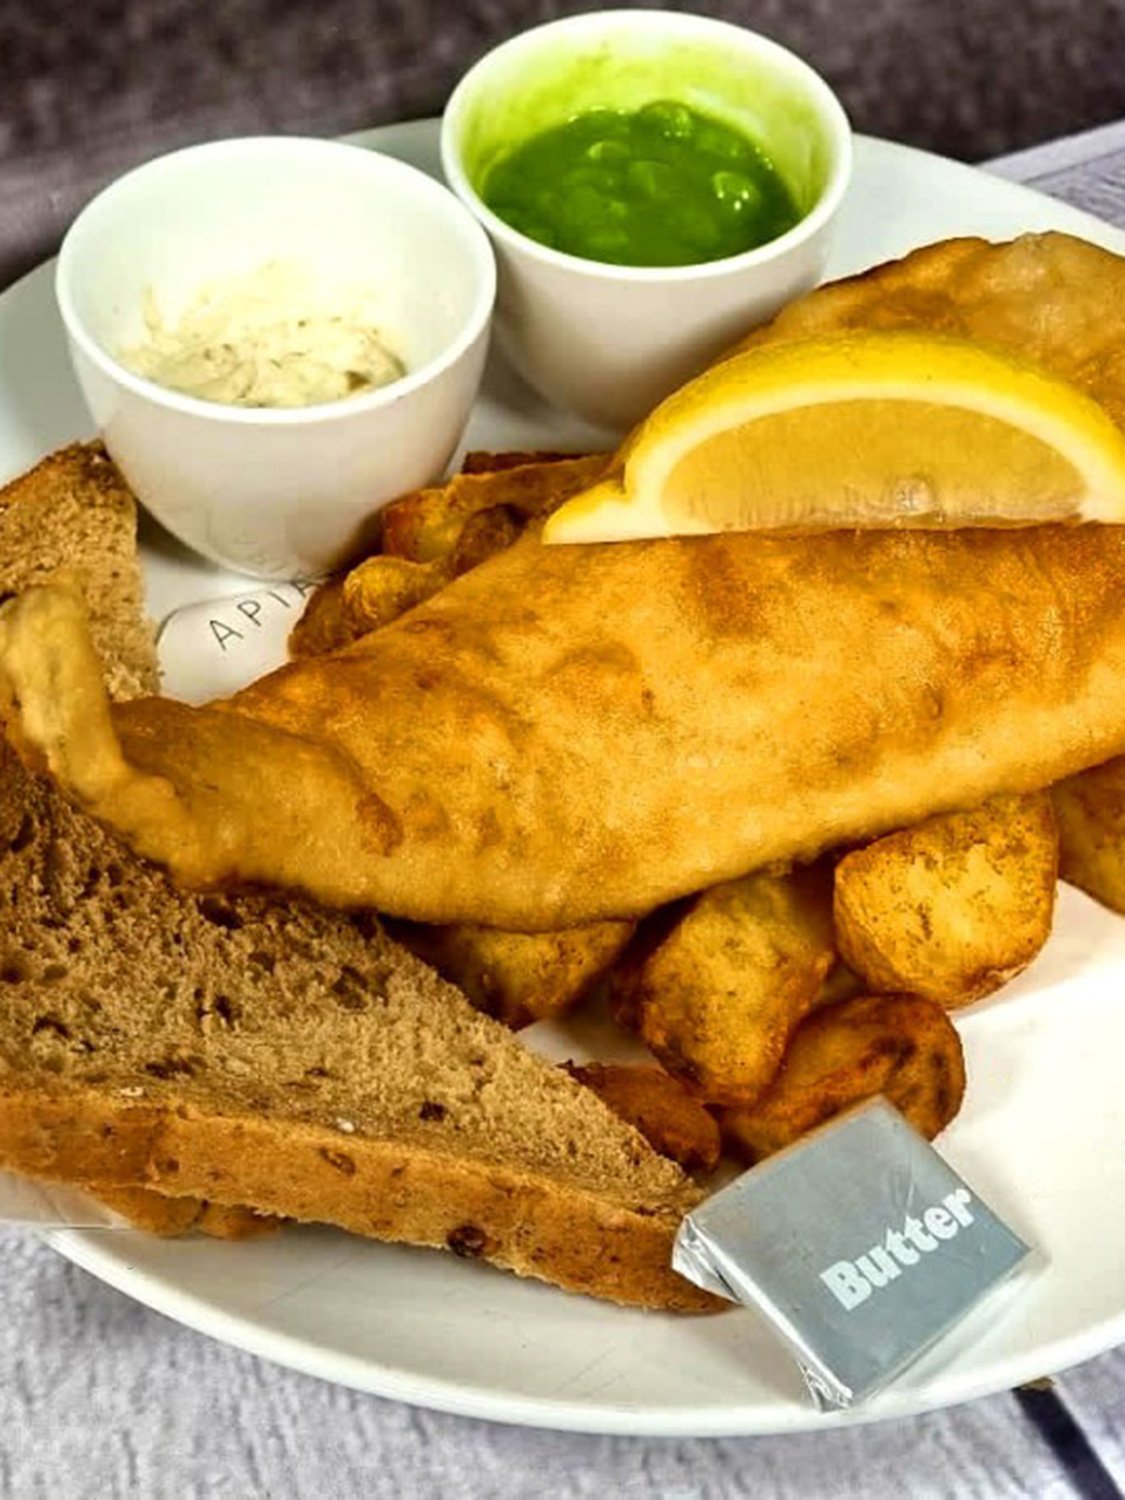 Apiary Fish & Chips. 8oz Cod fillets in gluten-free batter.